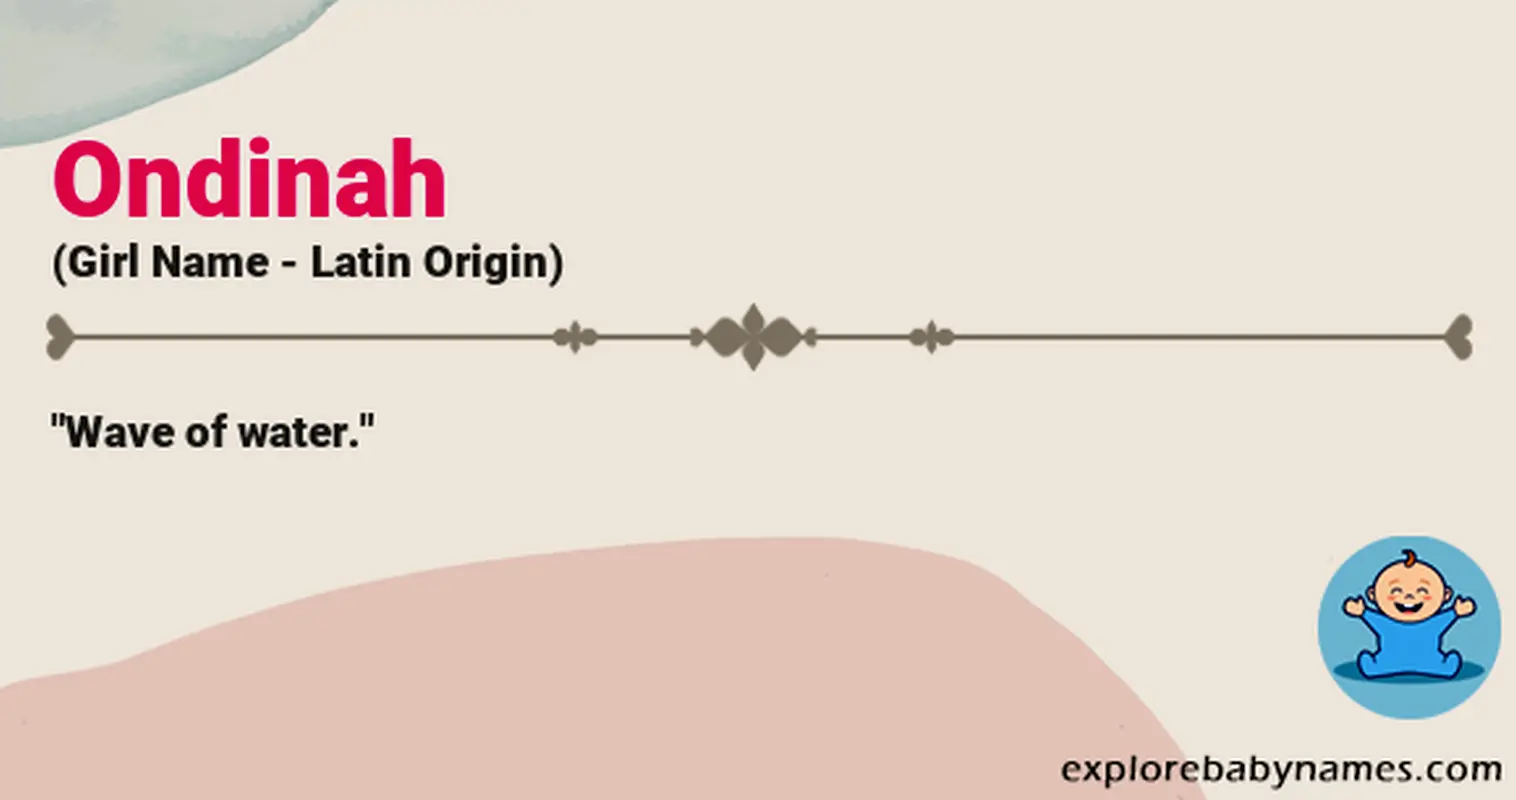 Meaning of Ondinah